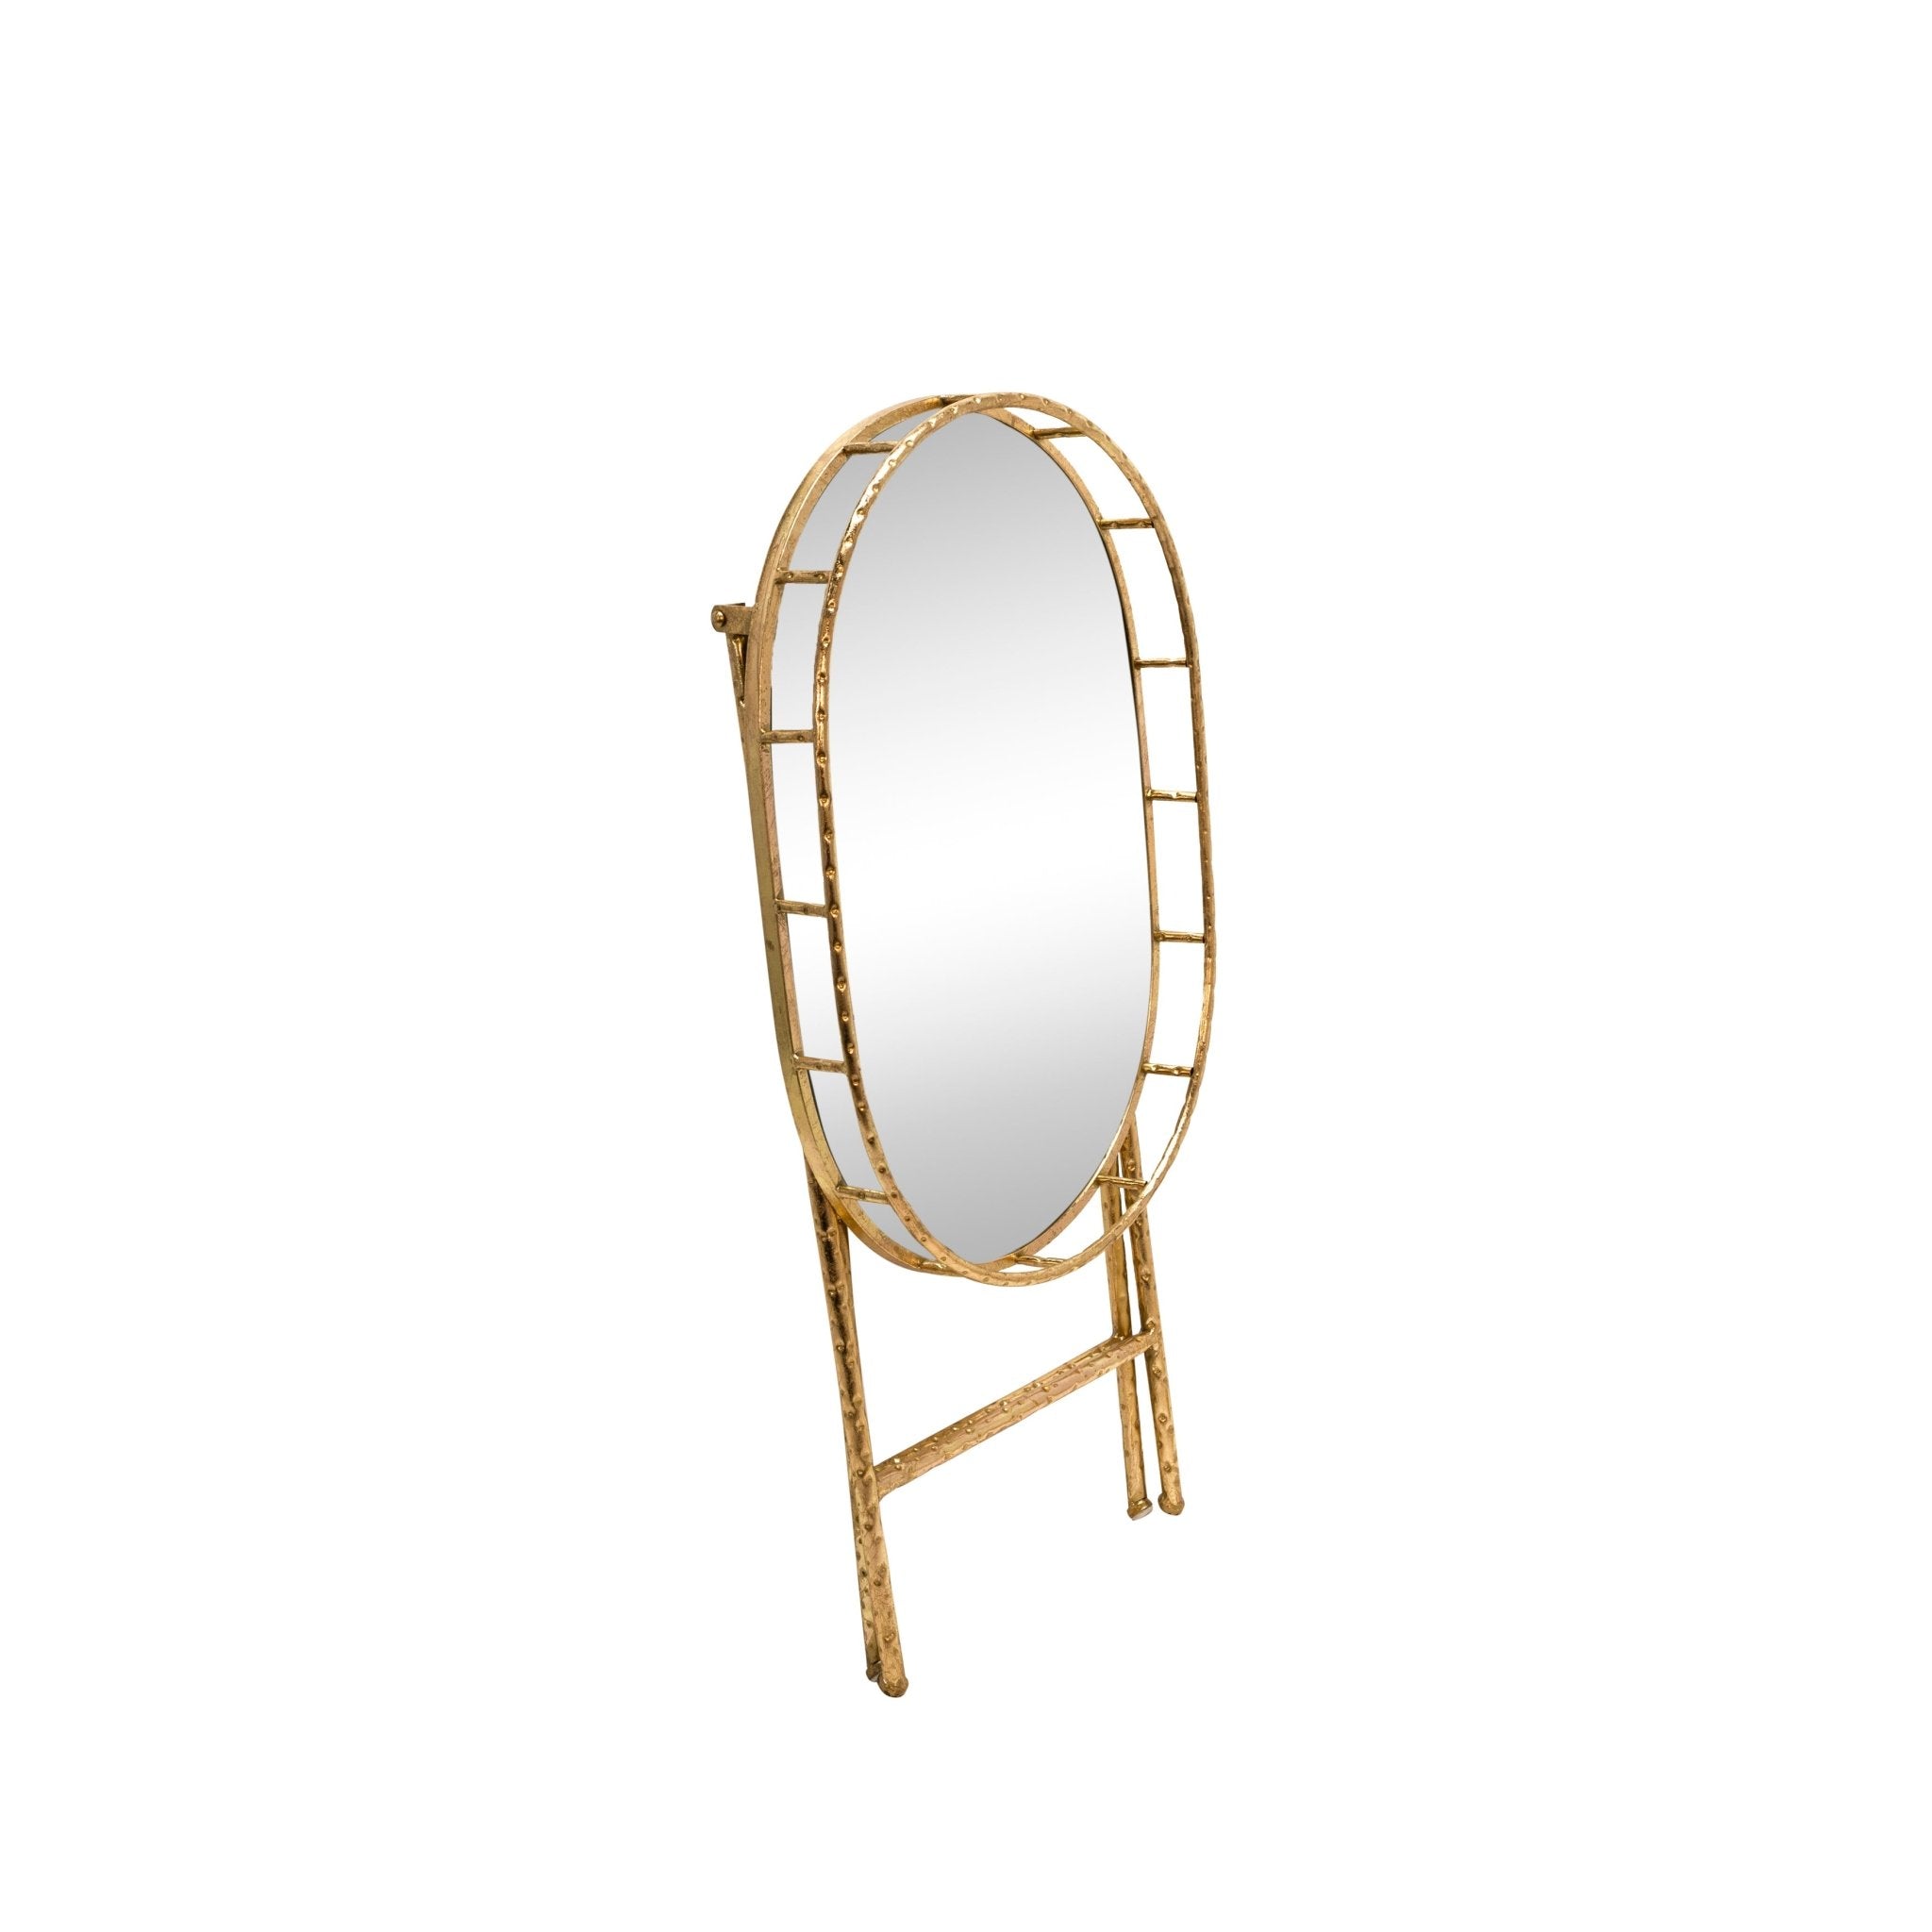 Sabebrook Home Oval Gold Metal Accent Table, Mirror Top - The Bar Design